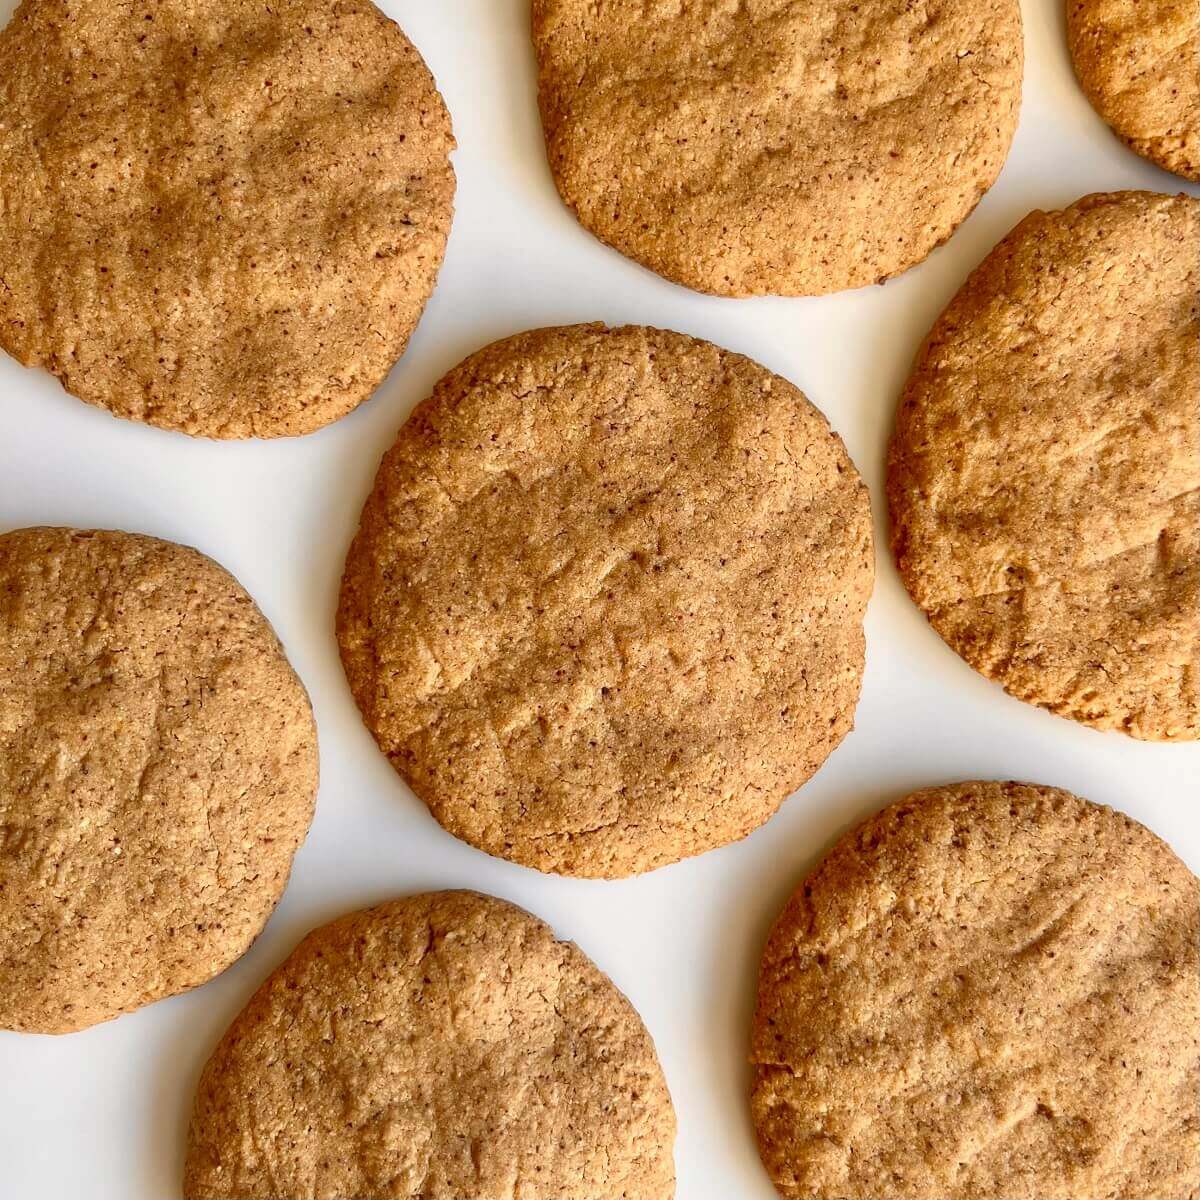 Corn flour cookies on a white plate.